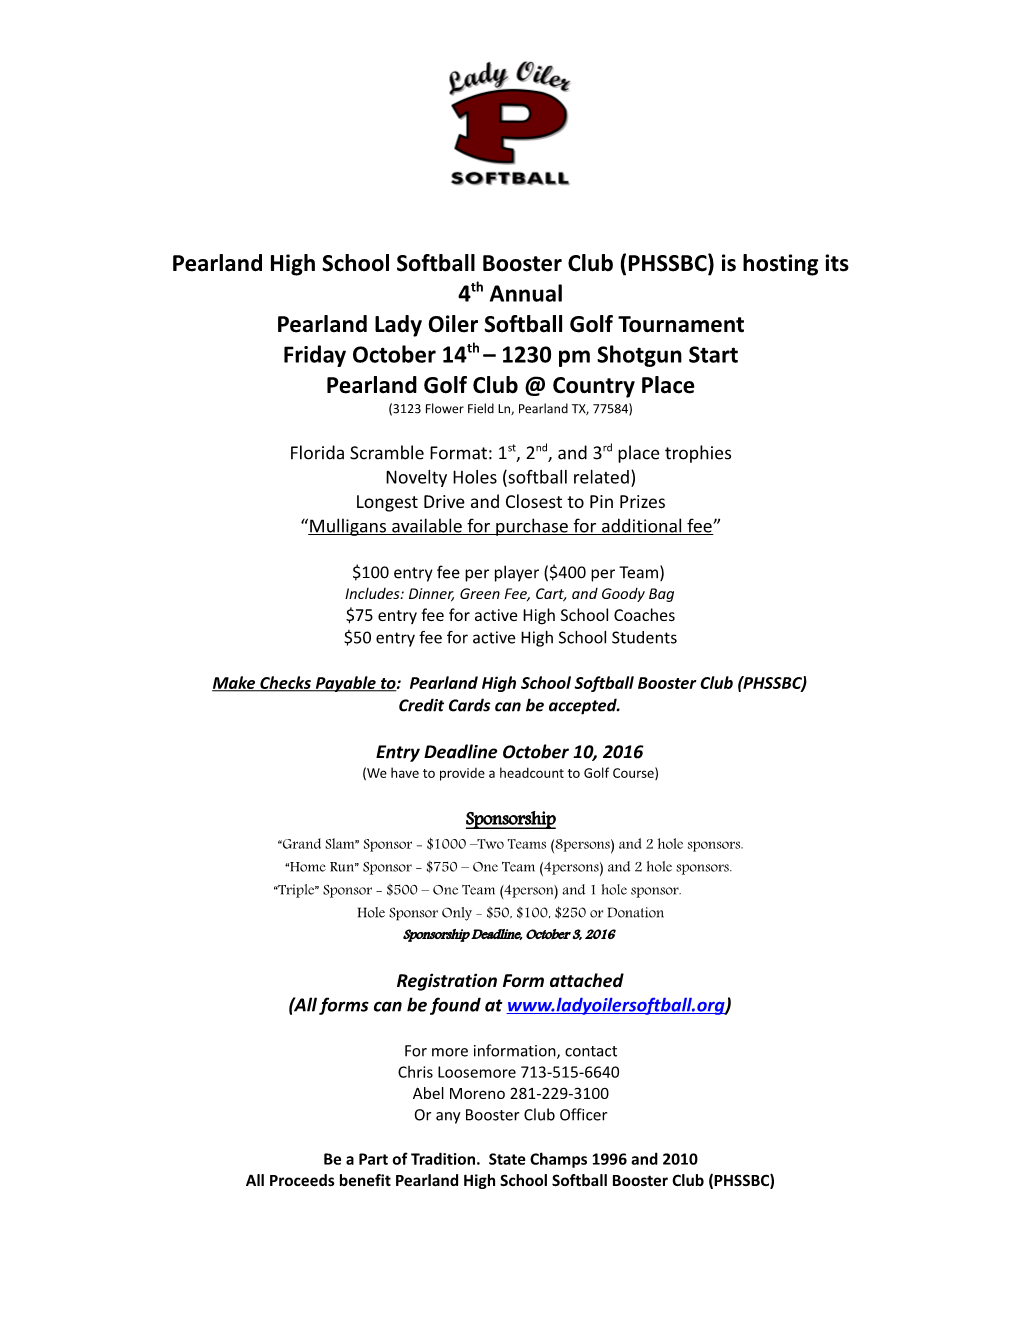 Pearland High School Softball Booster Club (PHSSBC) Is Hosting Its